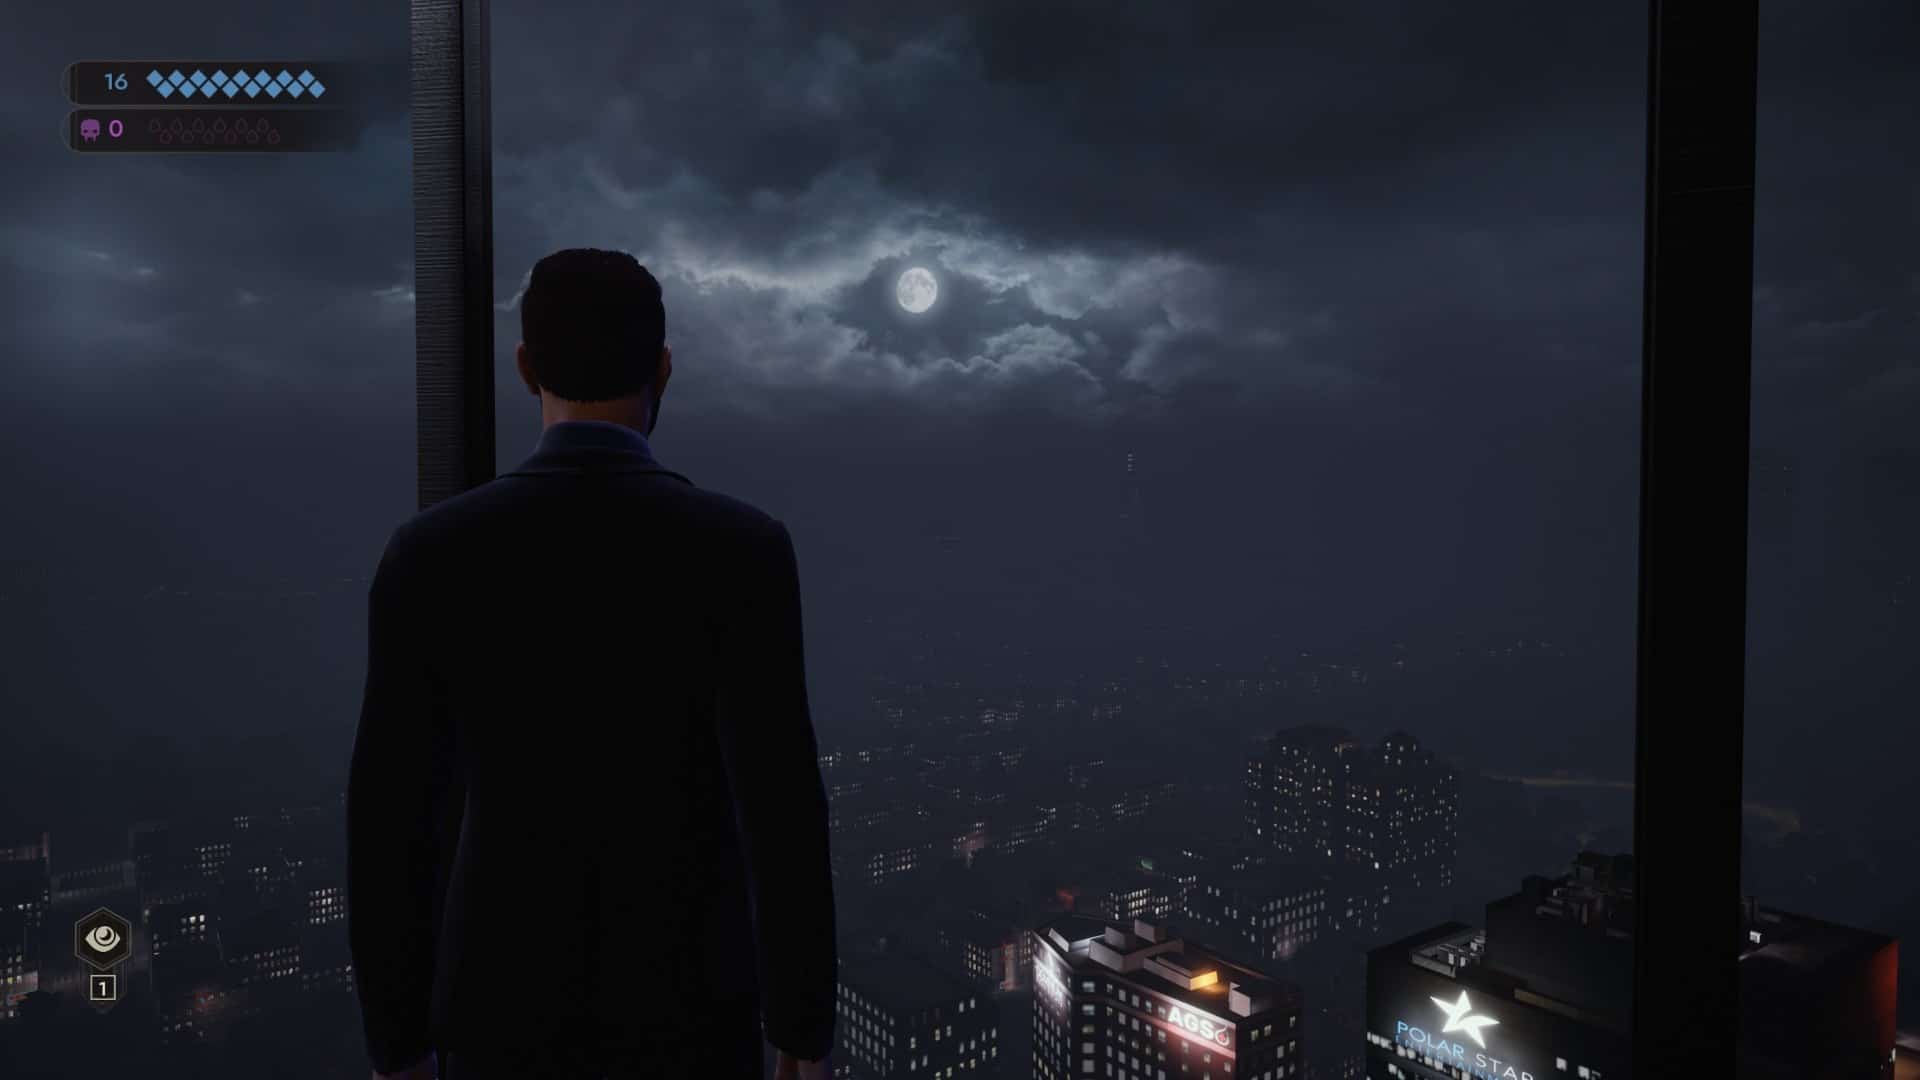 (The guy staring at the moon so thoughtfully is Galeb. He is one of your three protagonists and enjoys a legendary reputation. Unfortunately, we are not allowed to roam the streets of the city: Swansong is not an open world game.)